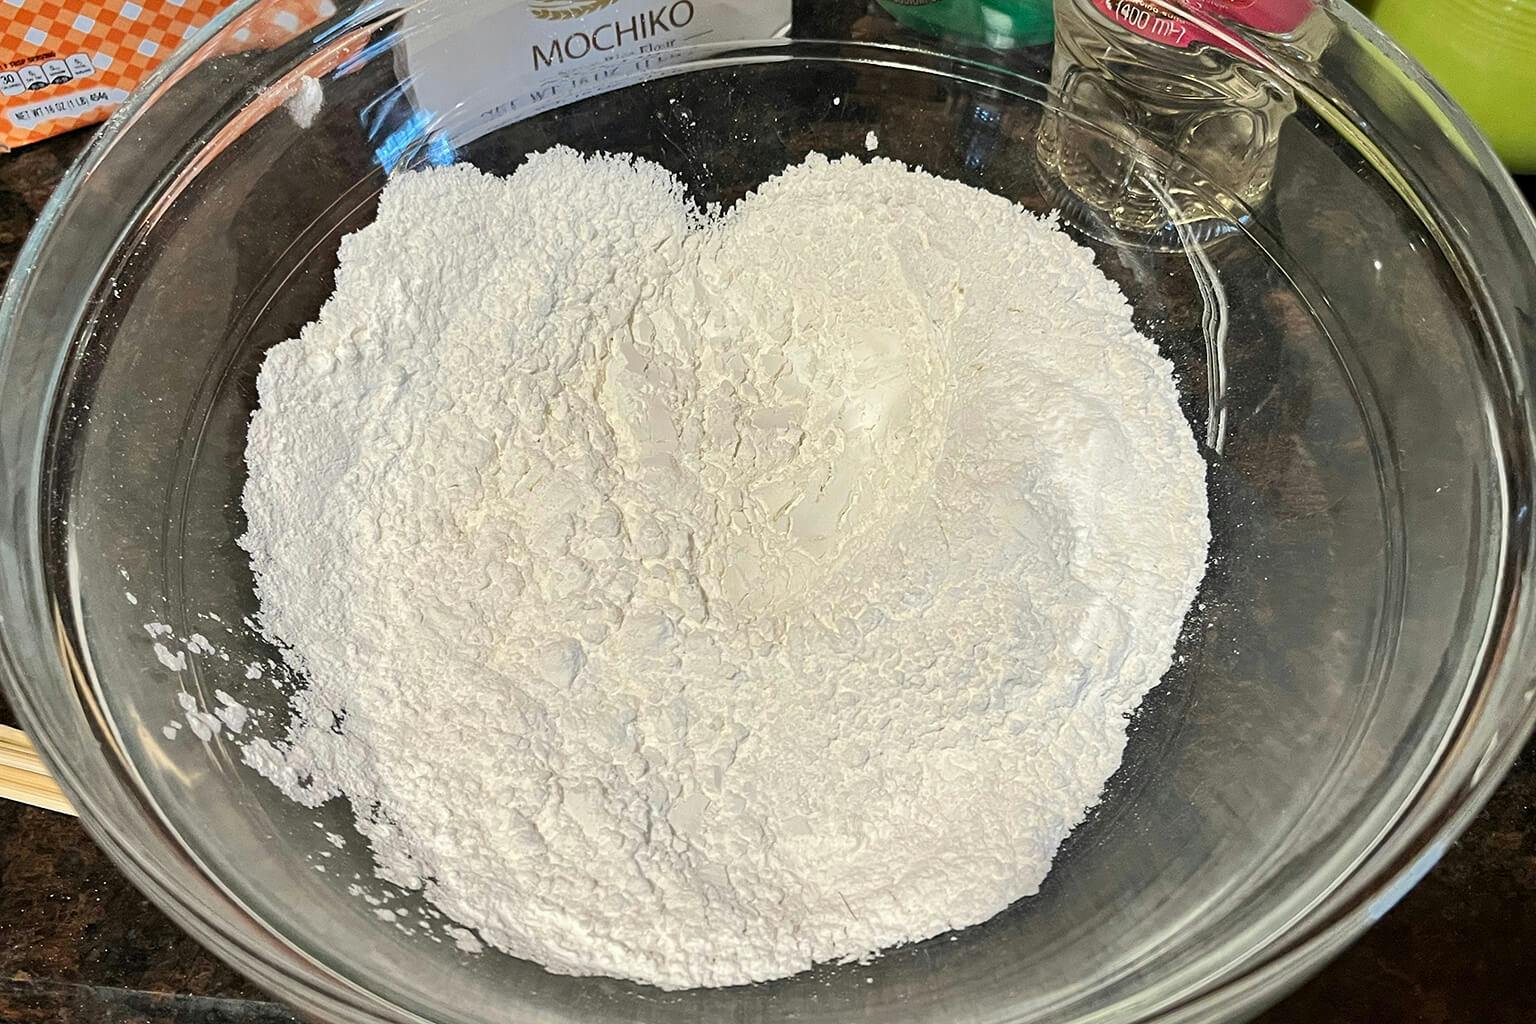 Mochi flour in the mixing bowl